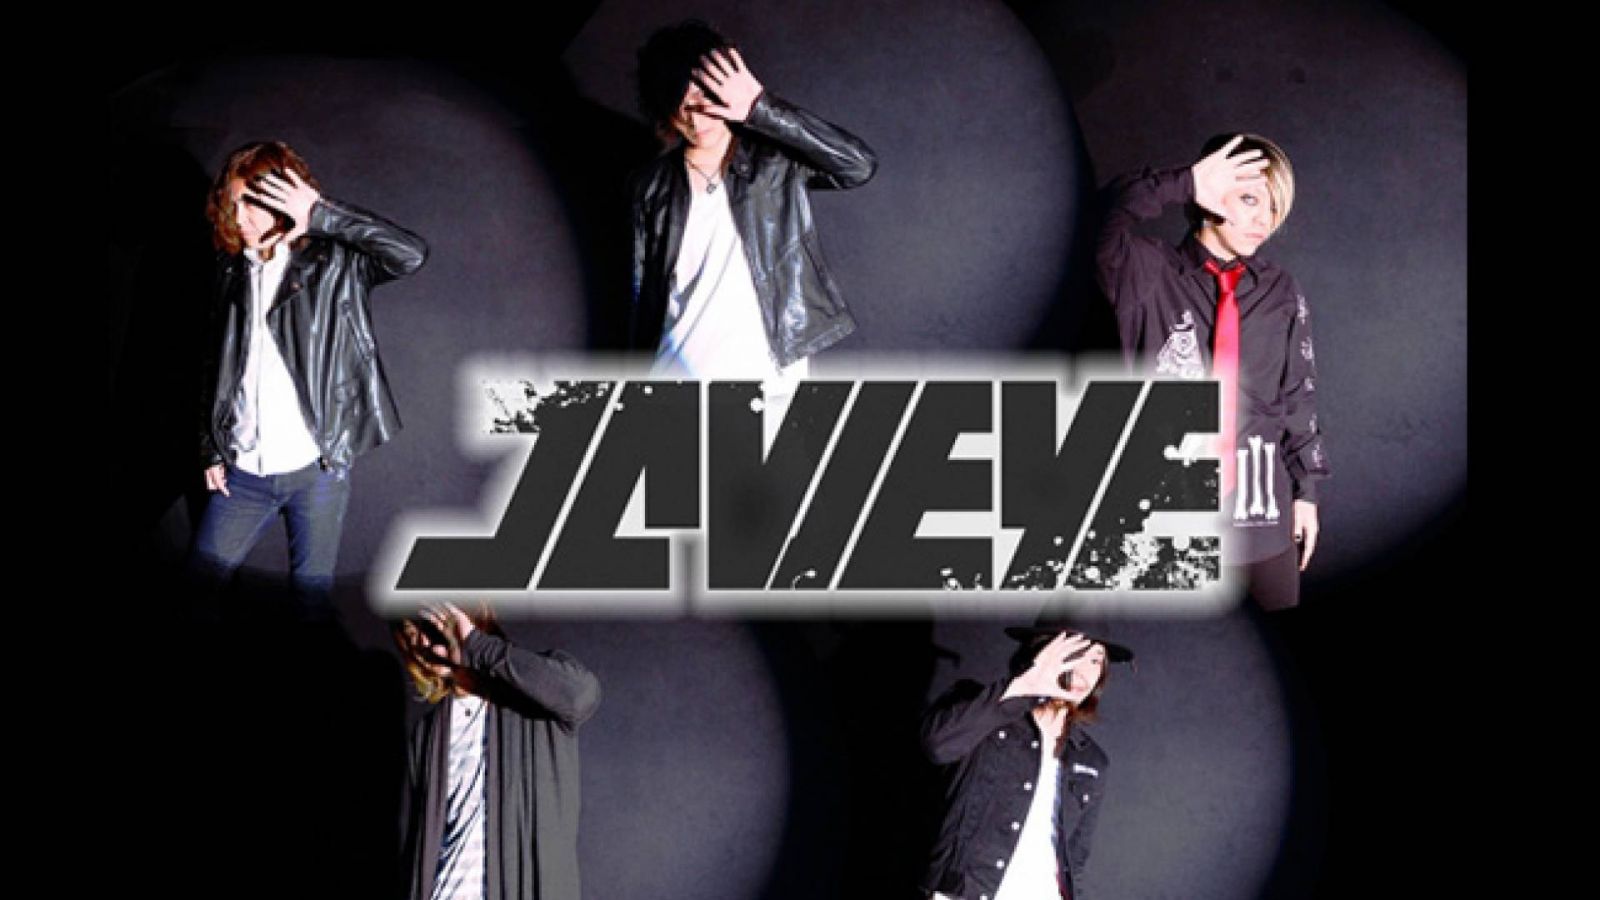 New Mini-Album from JAWEYE © JAWEYE. All rights reserved.